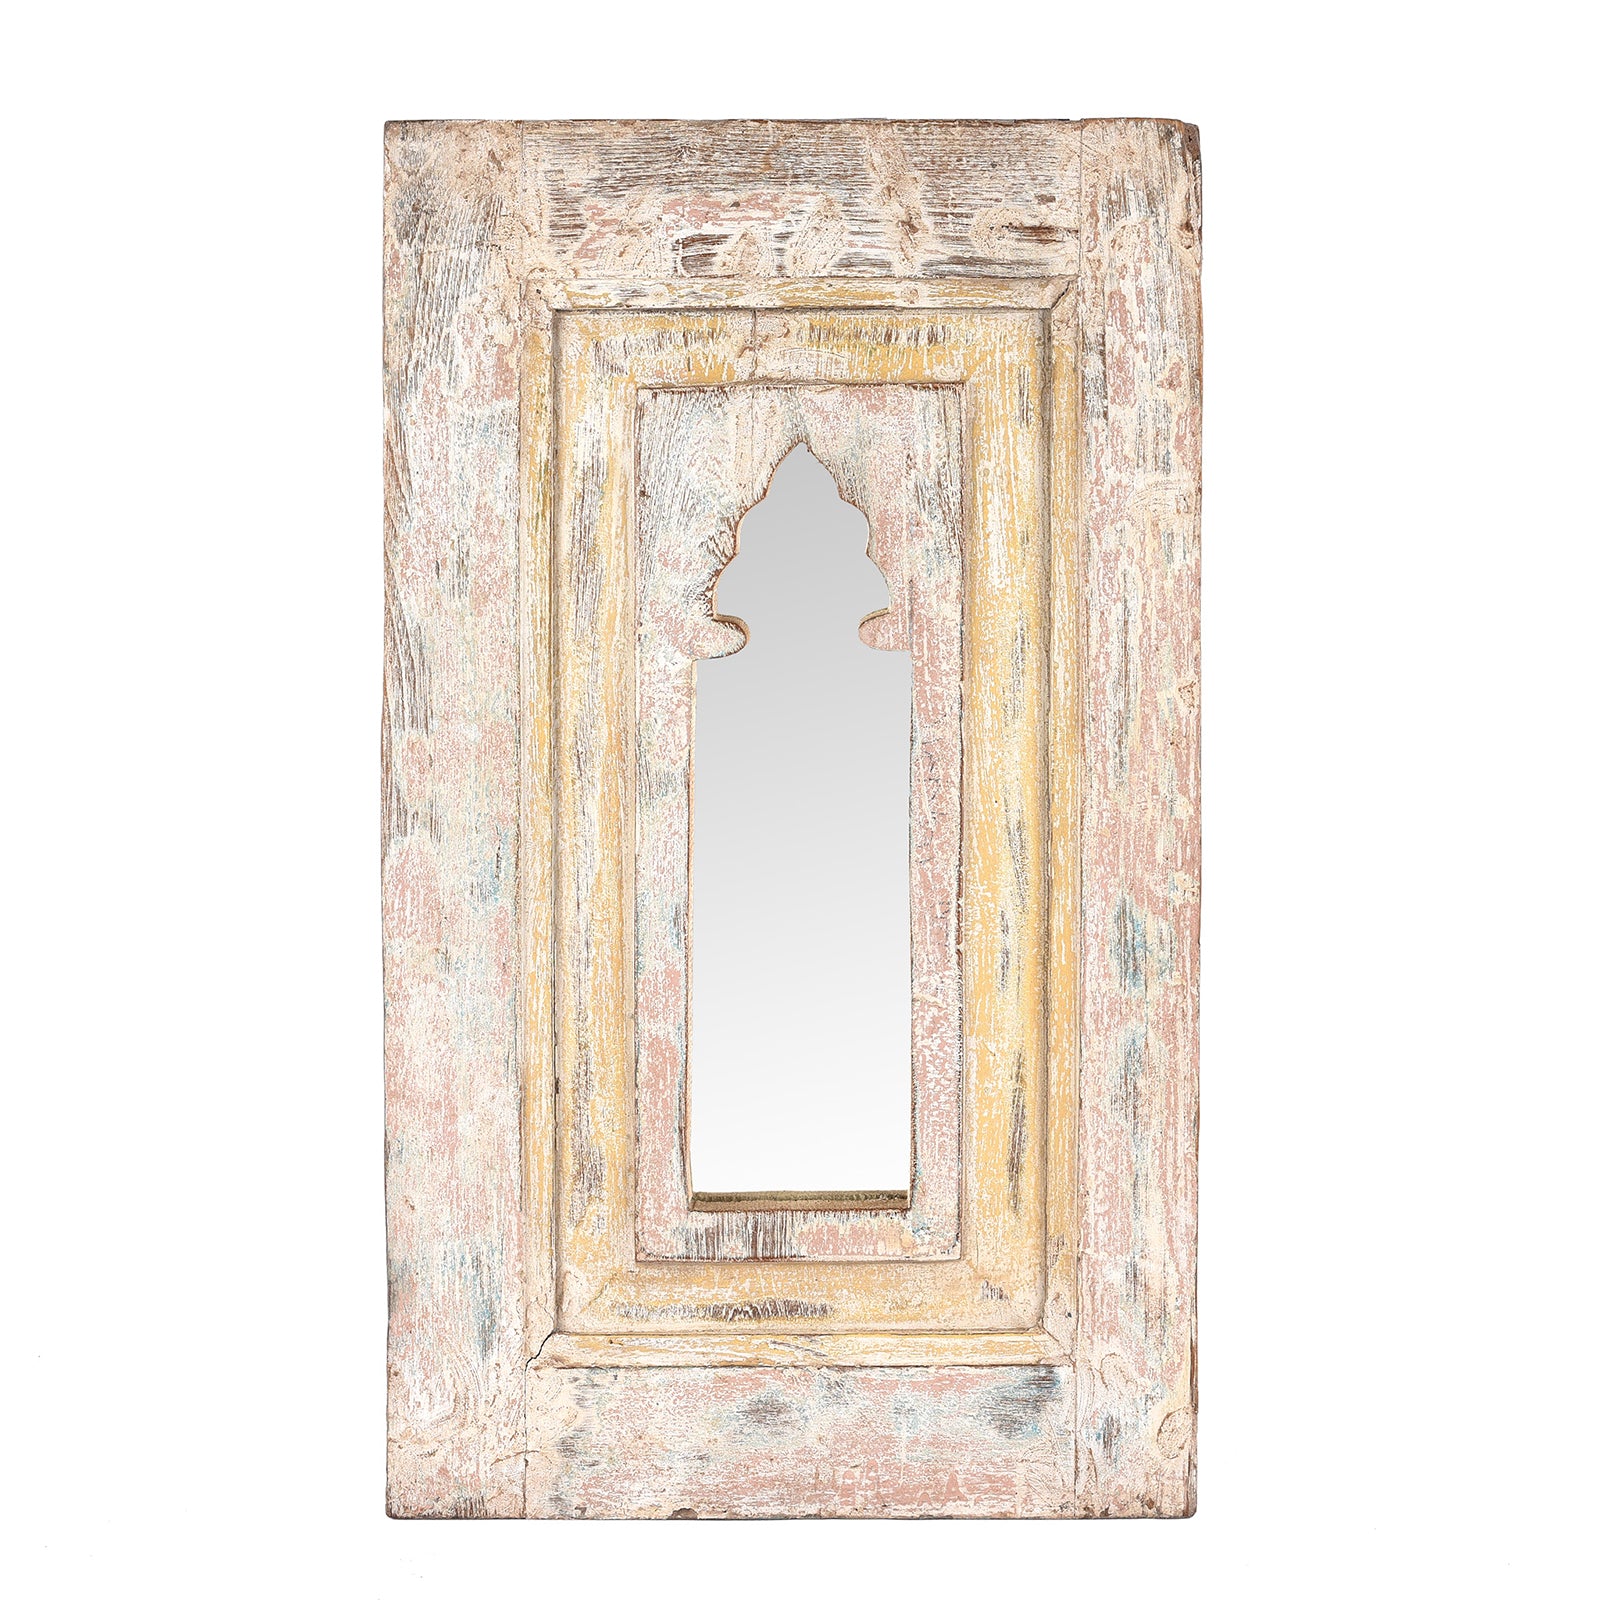 Antique Small Indian Mirror Made From Old Teak Mihrab Panel - 19th Century | Indigo Antiques